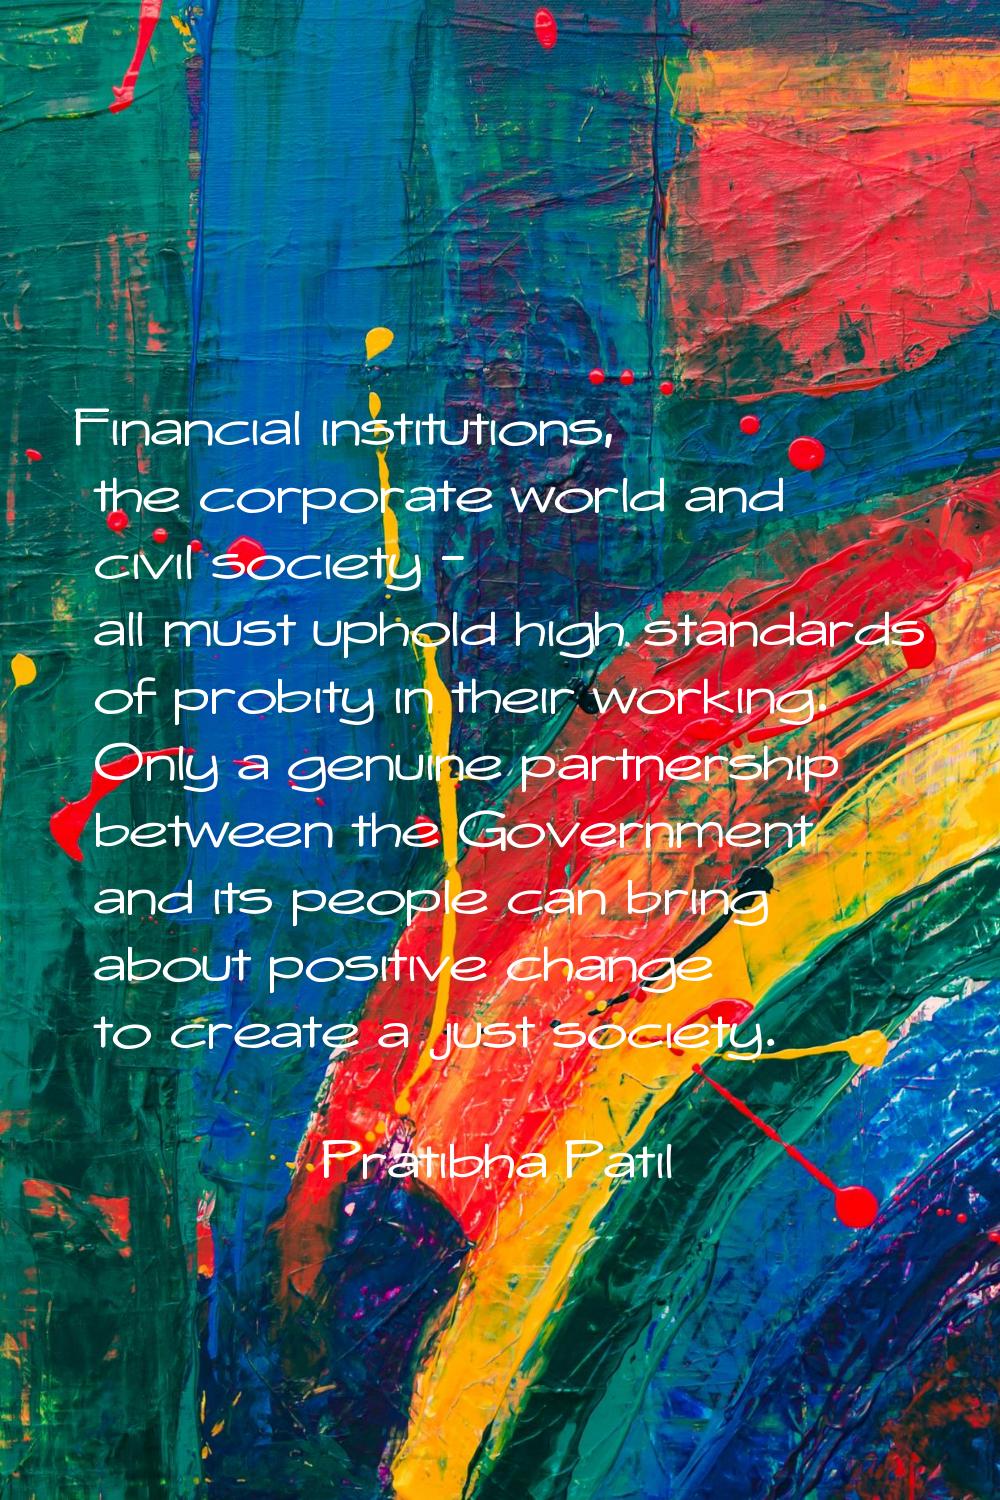 Financial institutions, the corporate world and civil society - all must uphold high standards of p